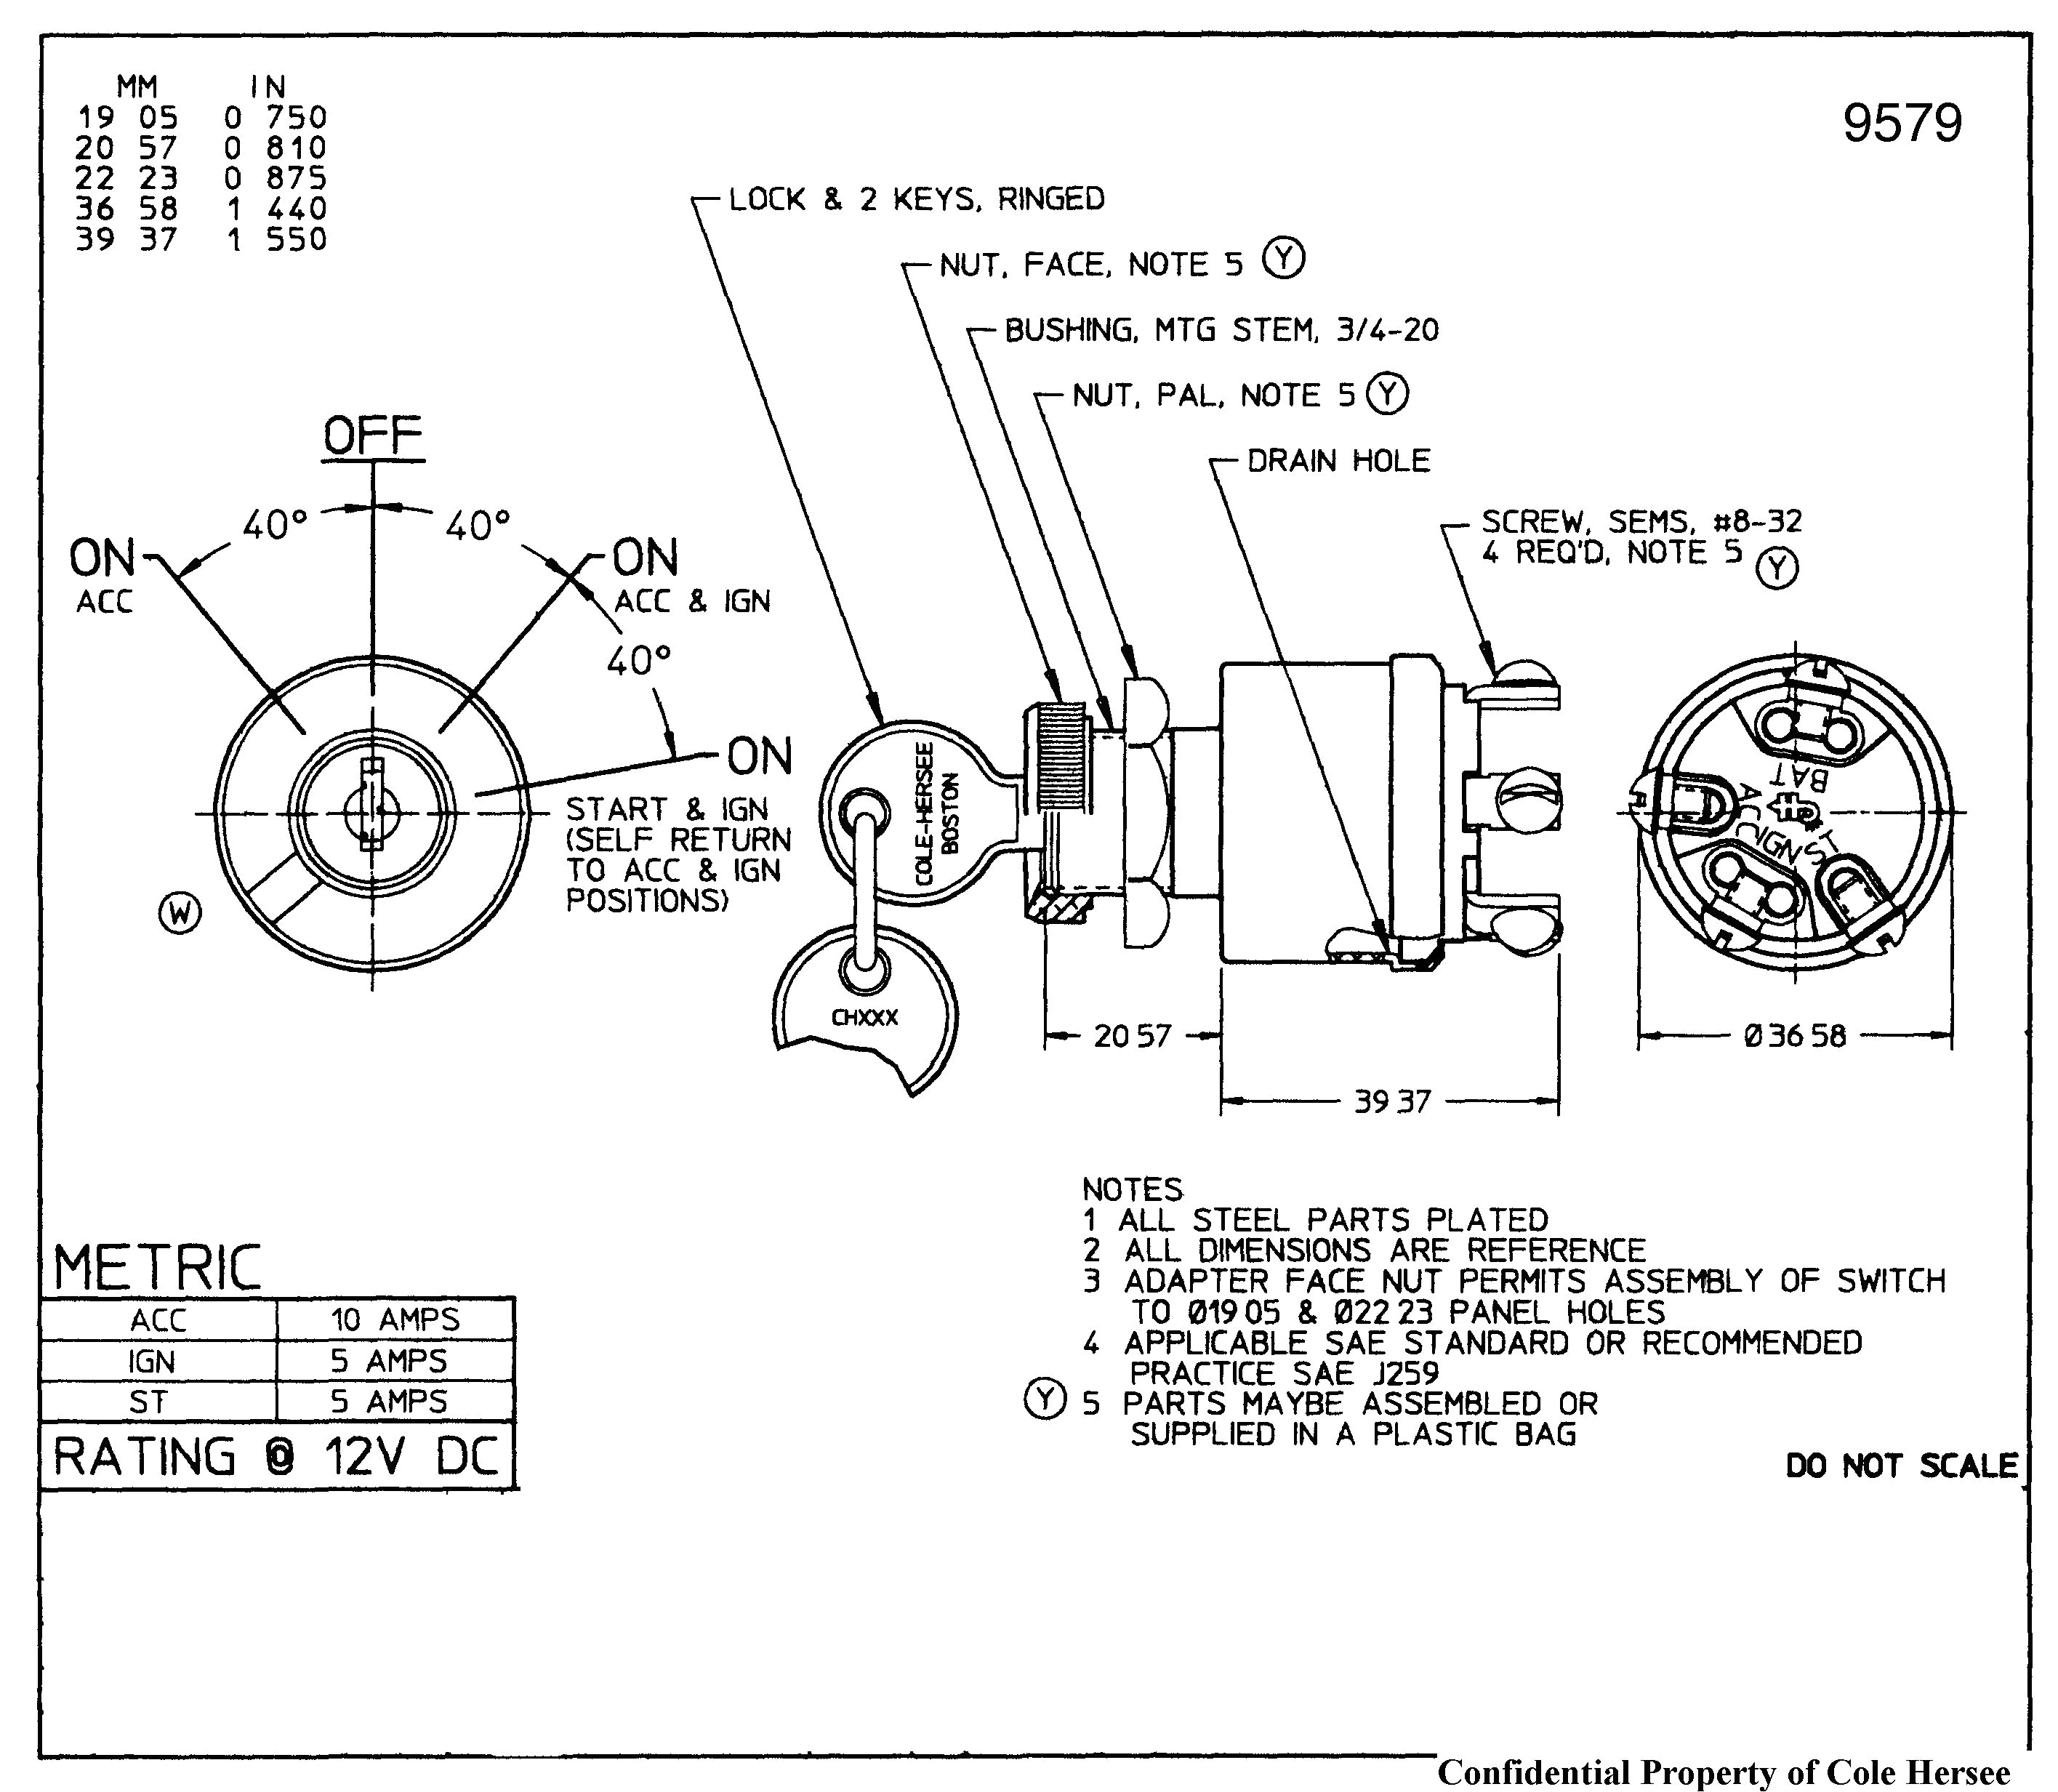 4 wire ignition diagram wiring diagrams konsult honda 4 wire ignition switch diagram